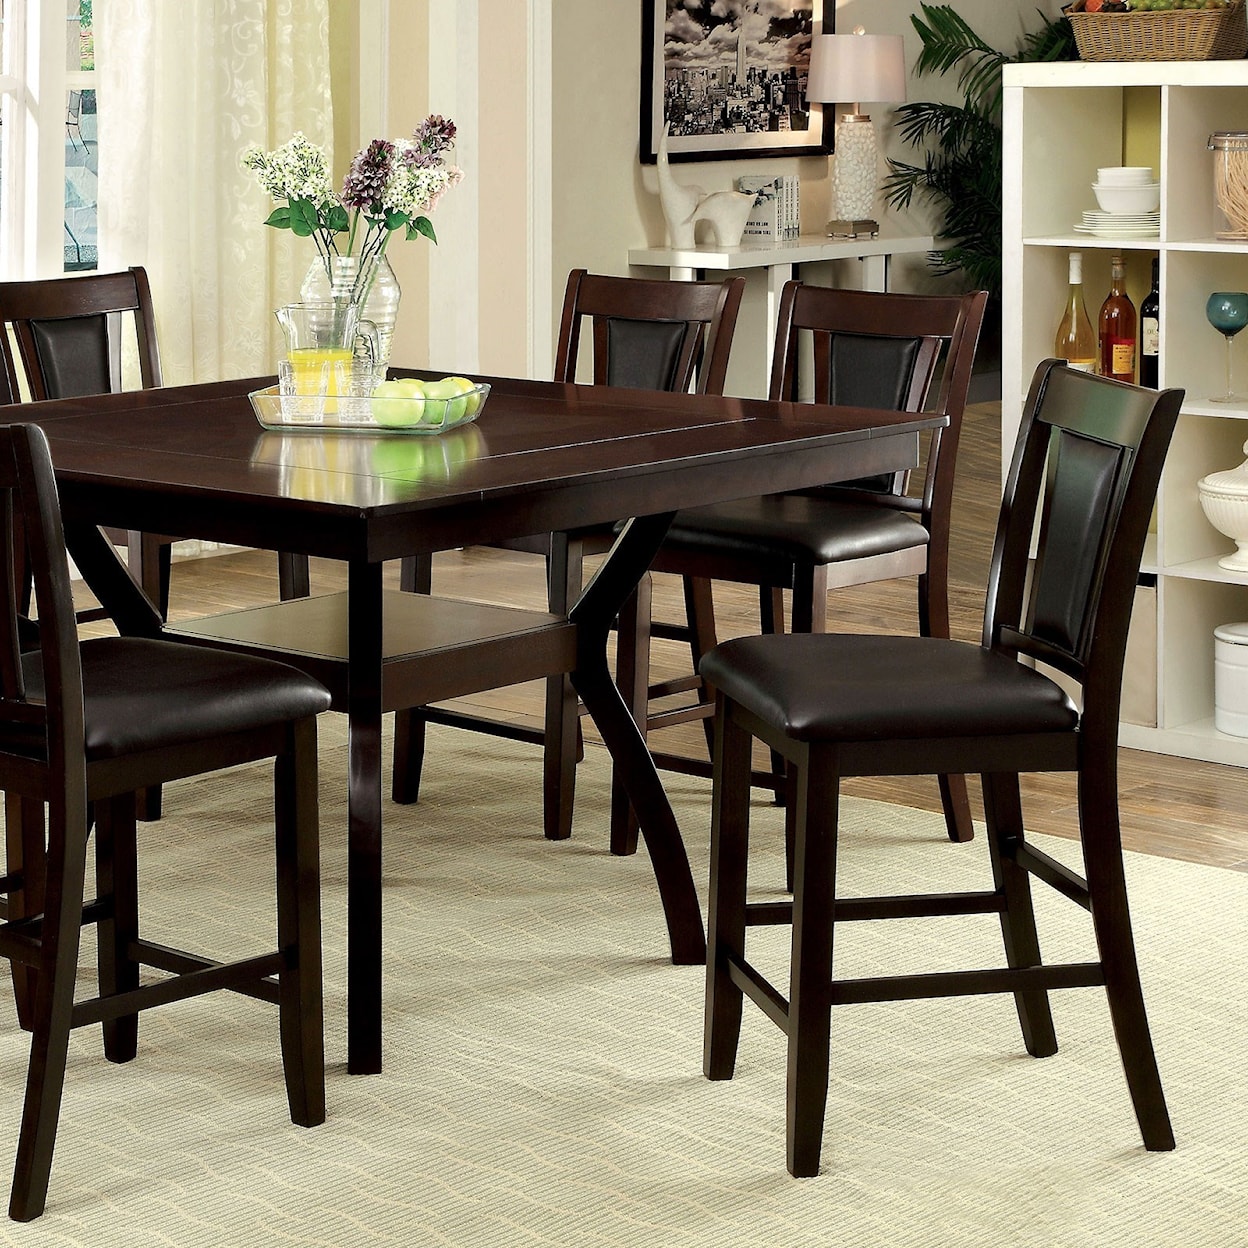 FUSA Brent 7 Pc Counter Height Dining Set